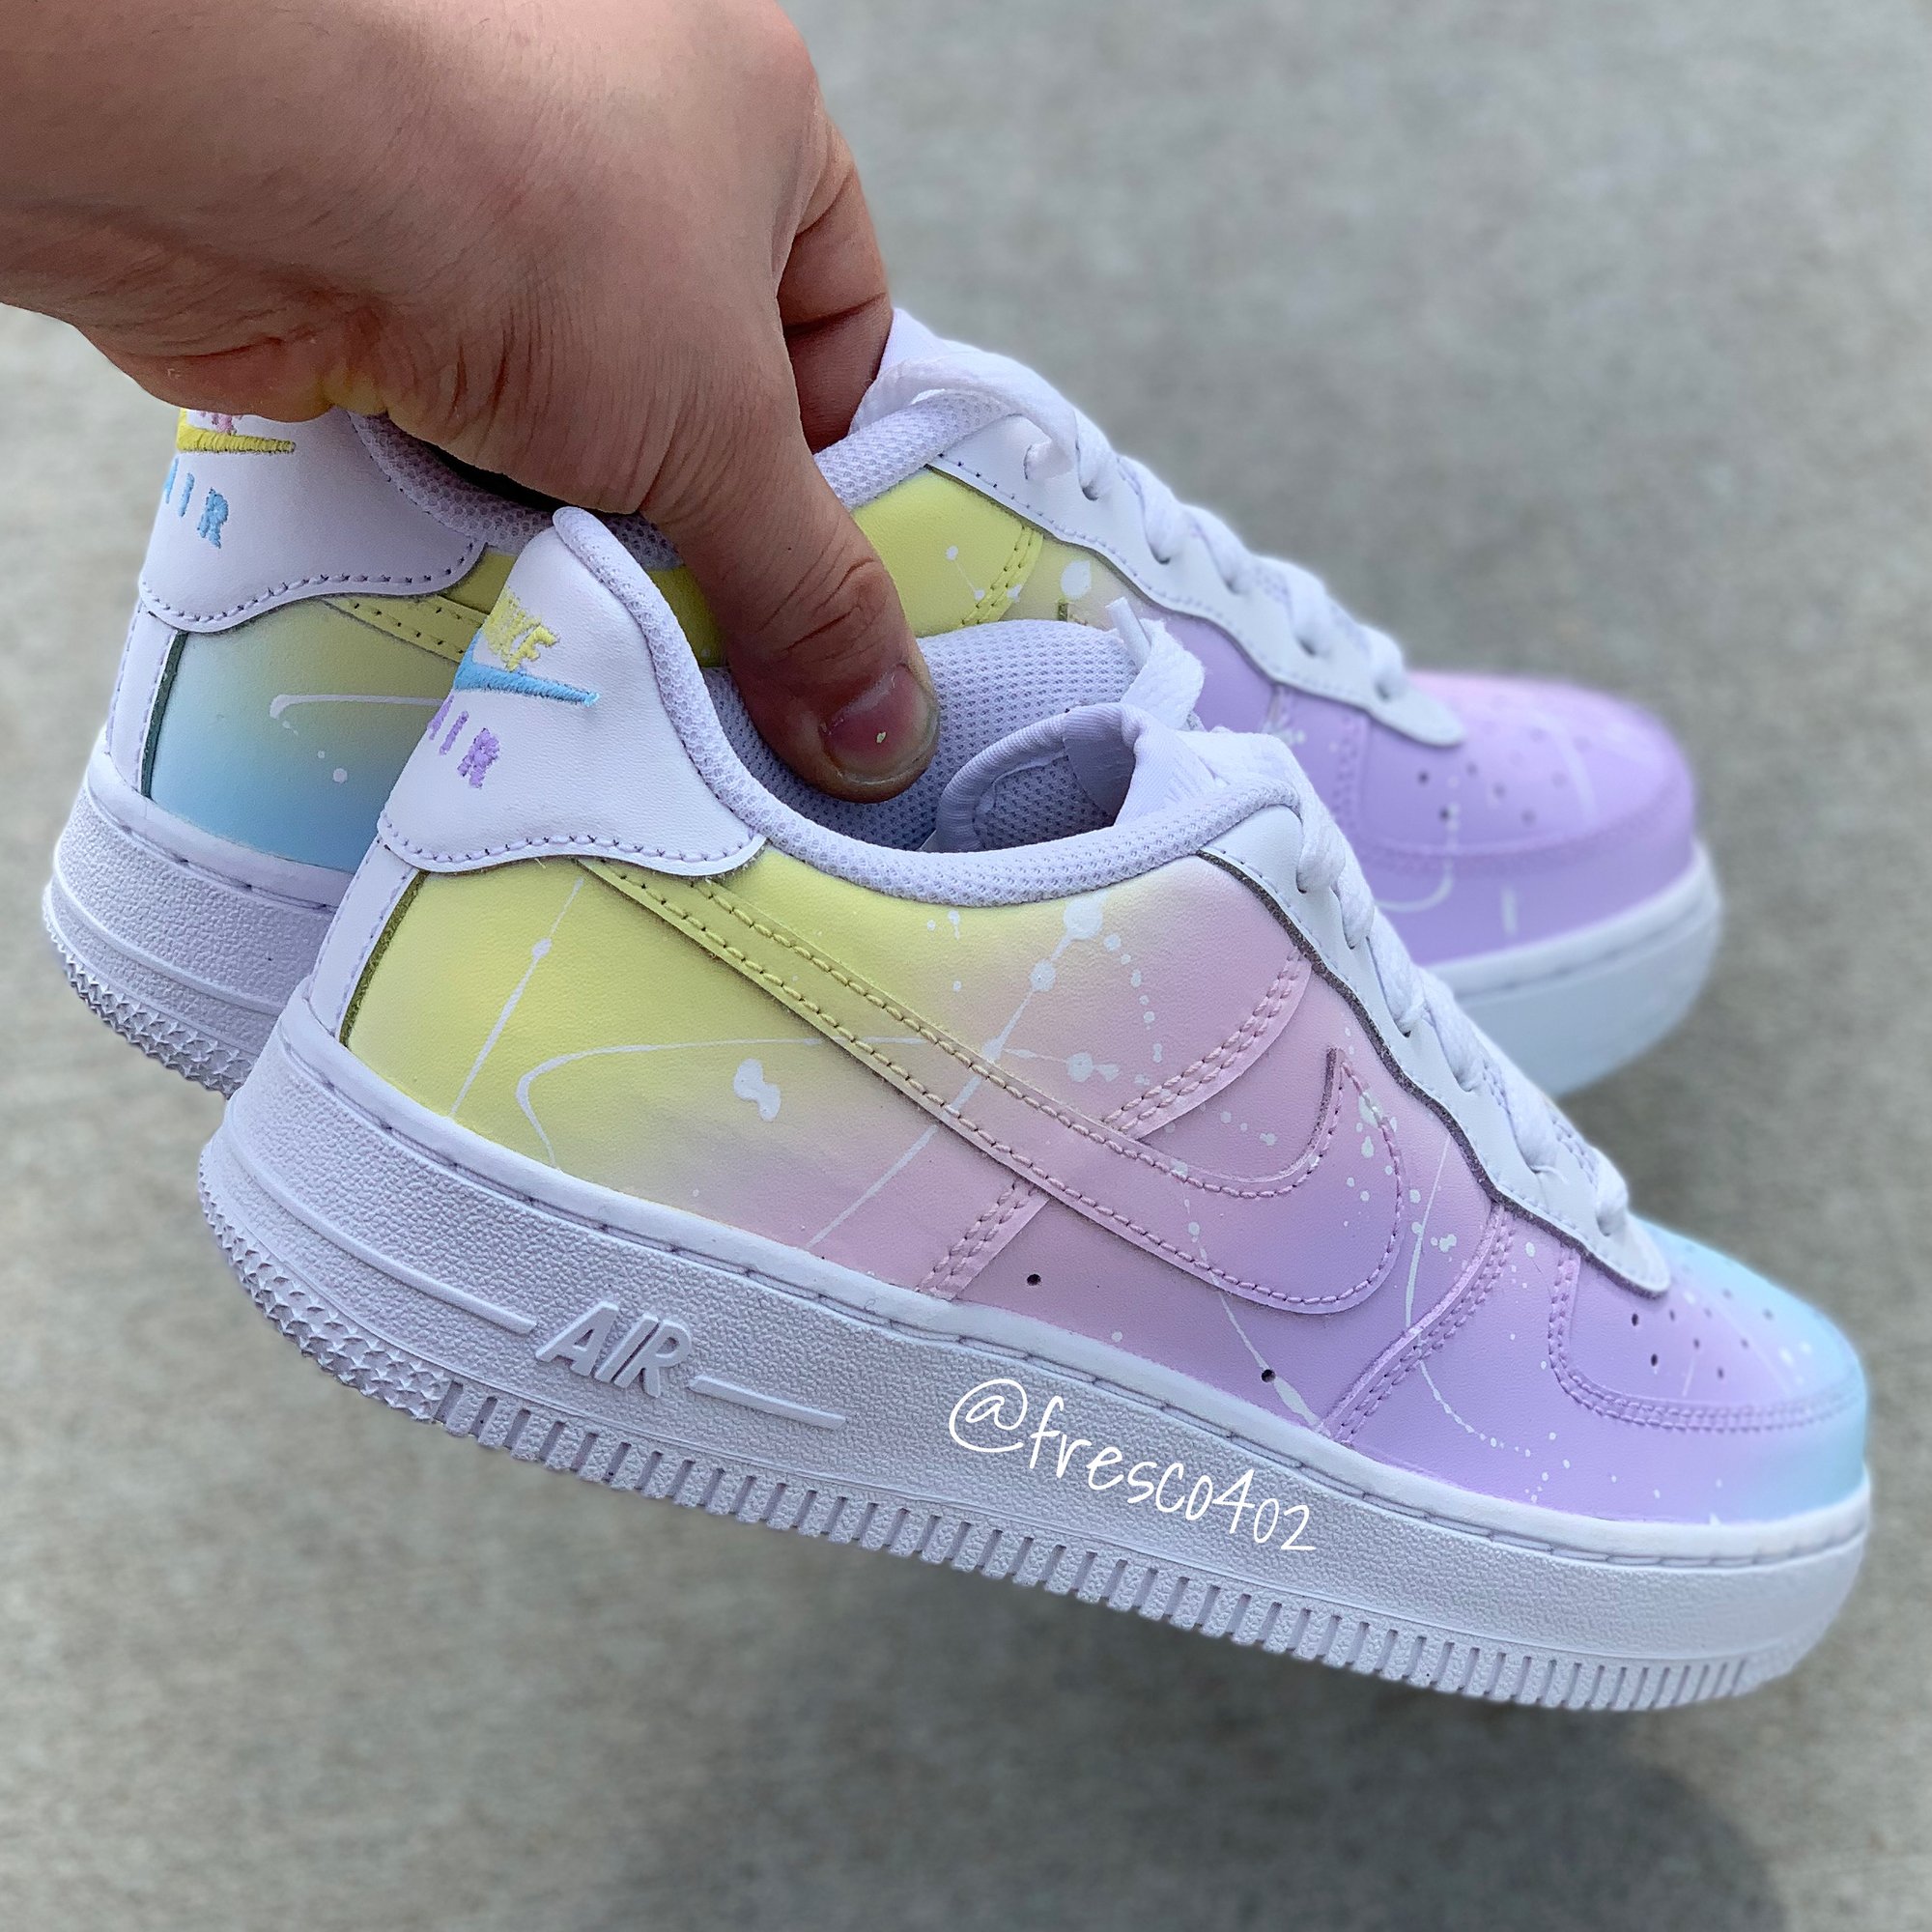 Cotton Candy AF1s - Custom Shoes